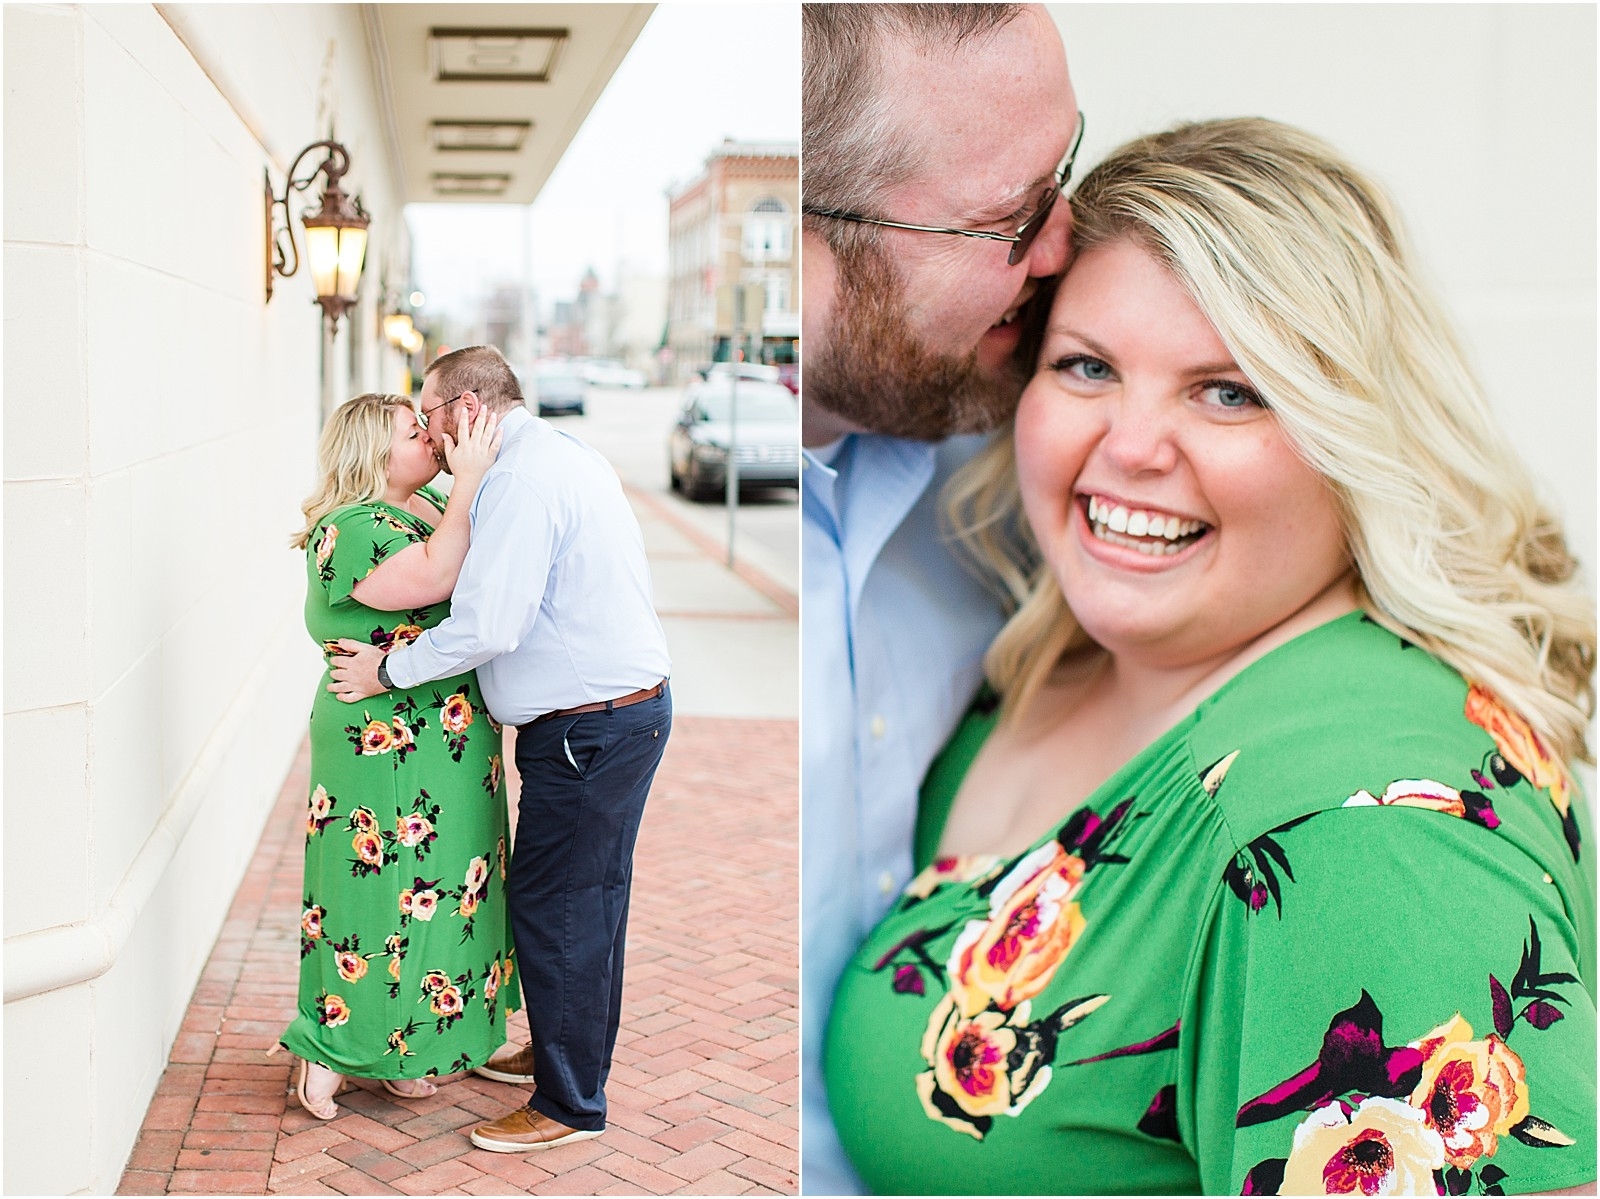 The Best of Engagement Sessions 2020 Recap0015.jpg